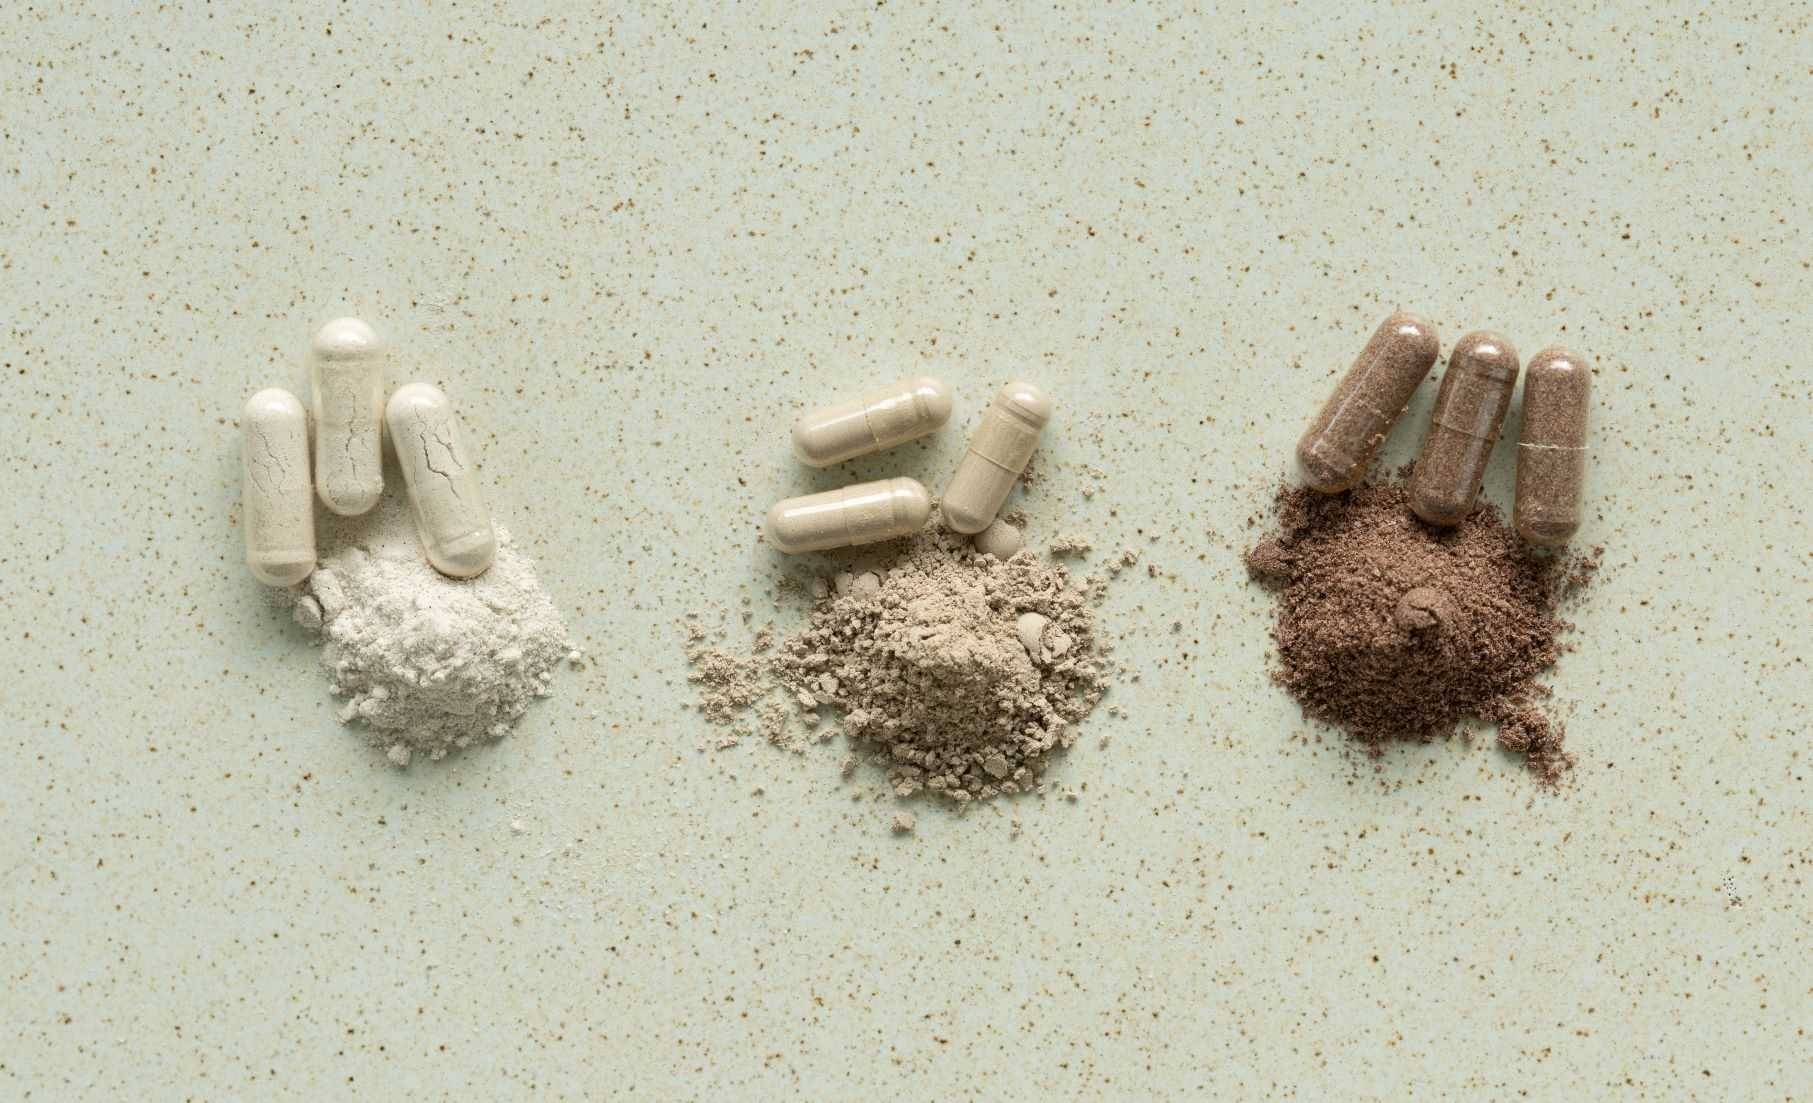 three types of deer velvet capsule and powder on a table.